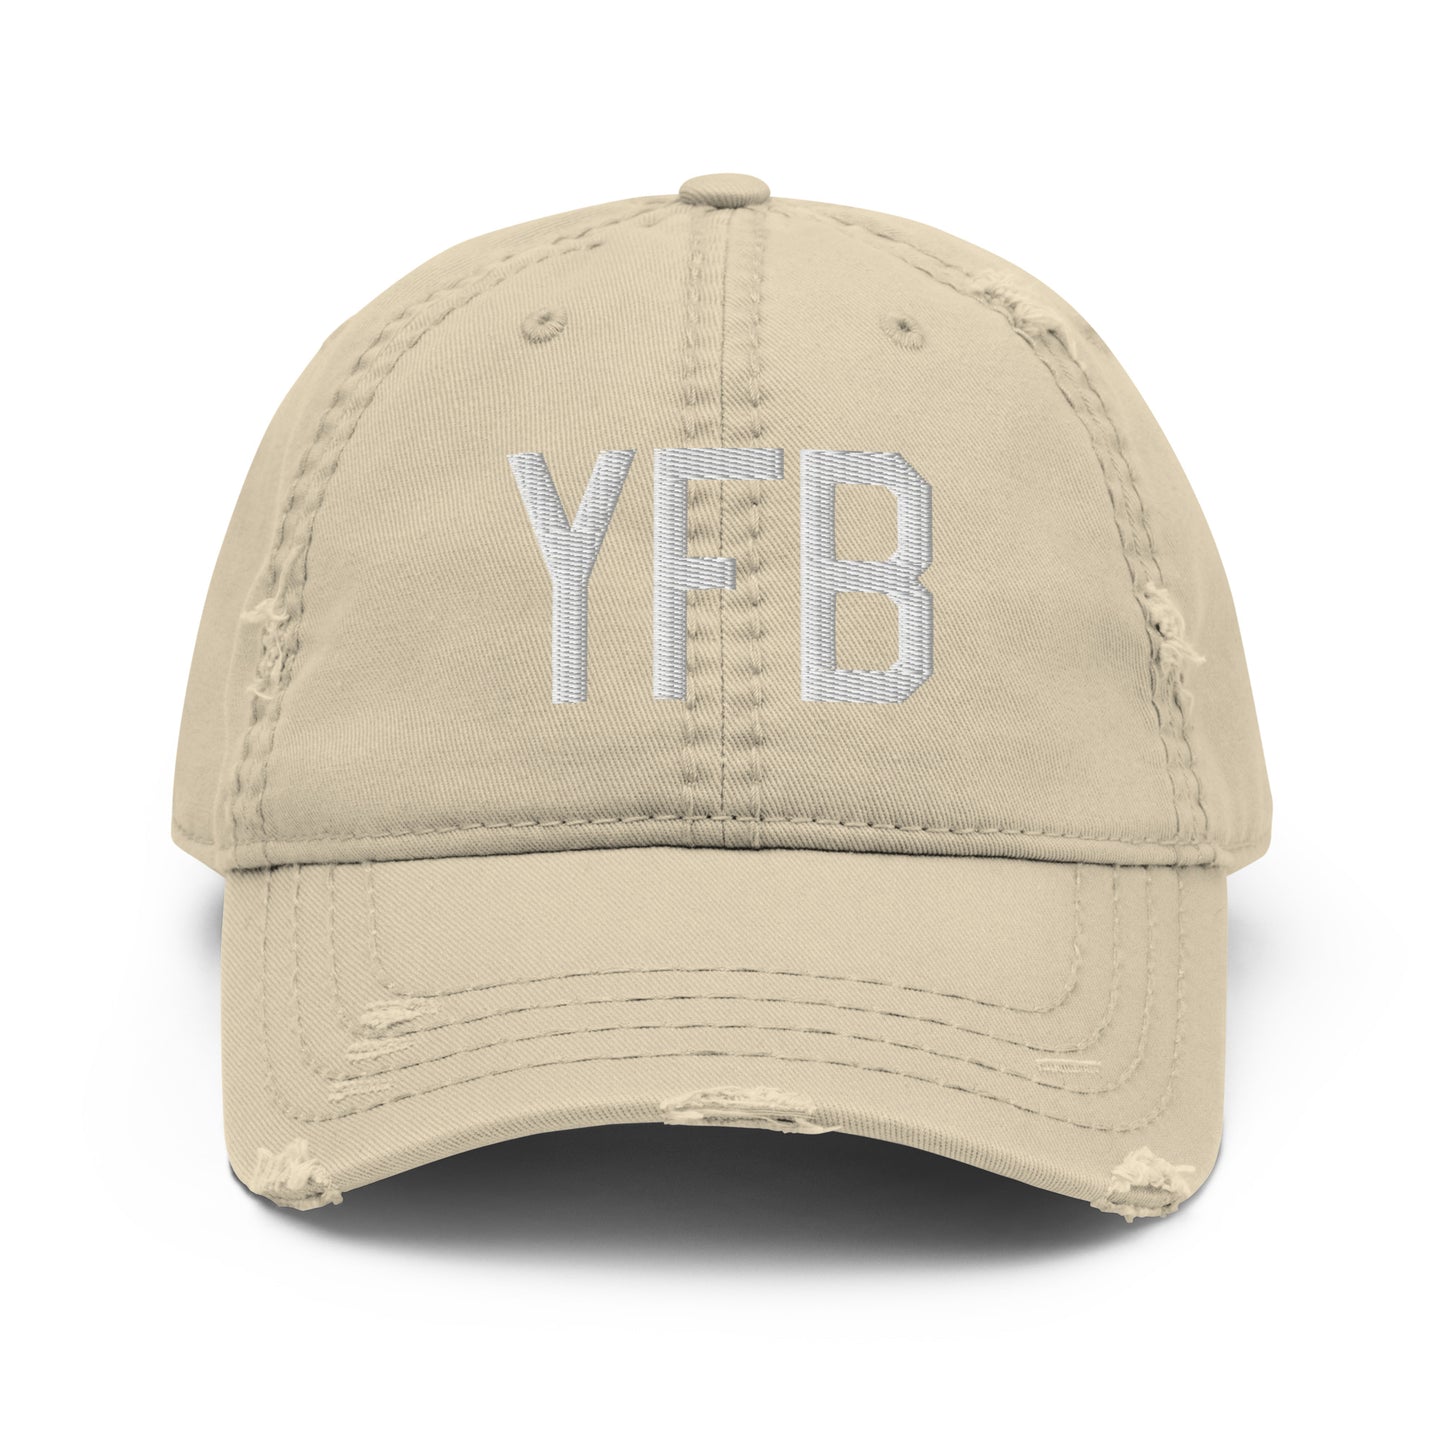 Airport Code Distressed Hat - White • YFB Iqaluit • YHM Designs - Image 18